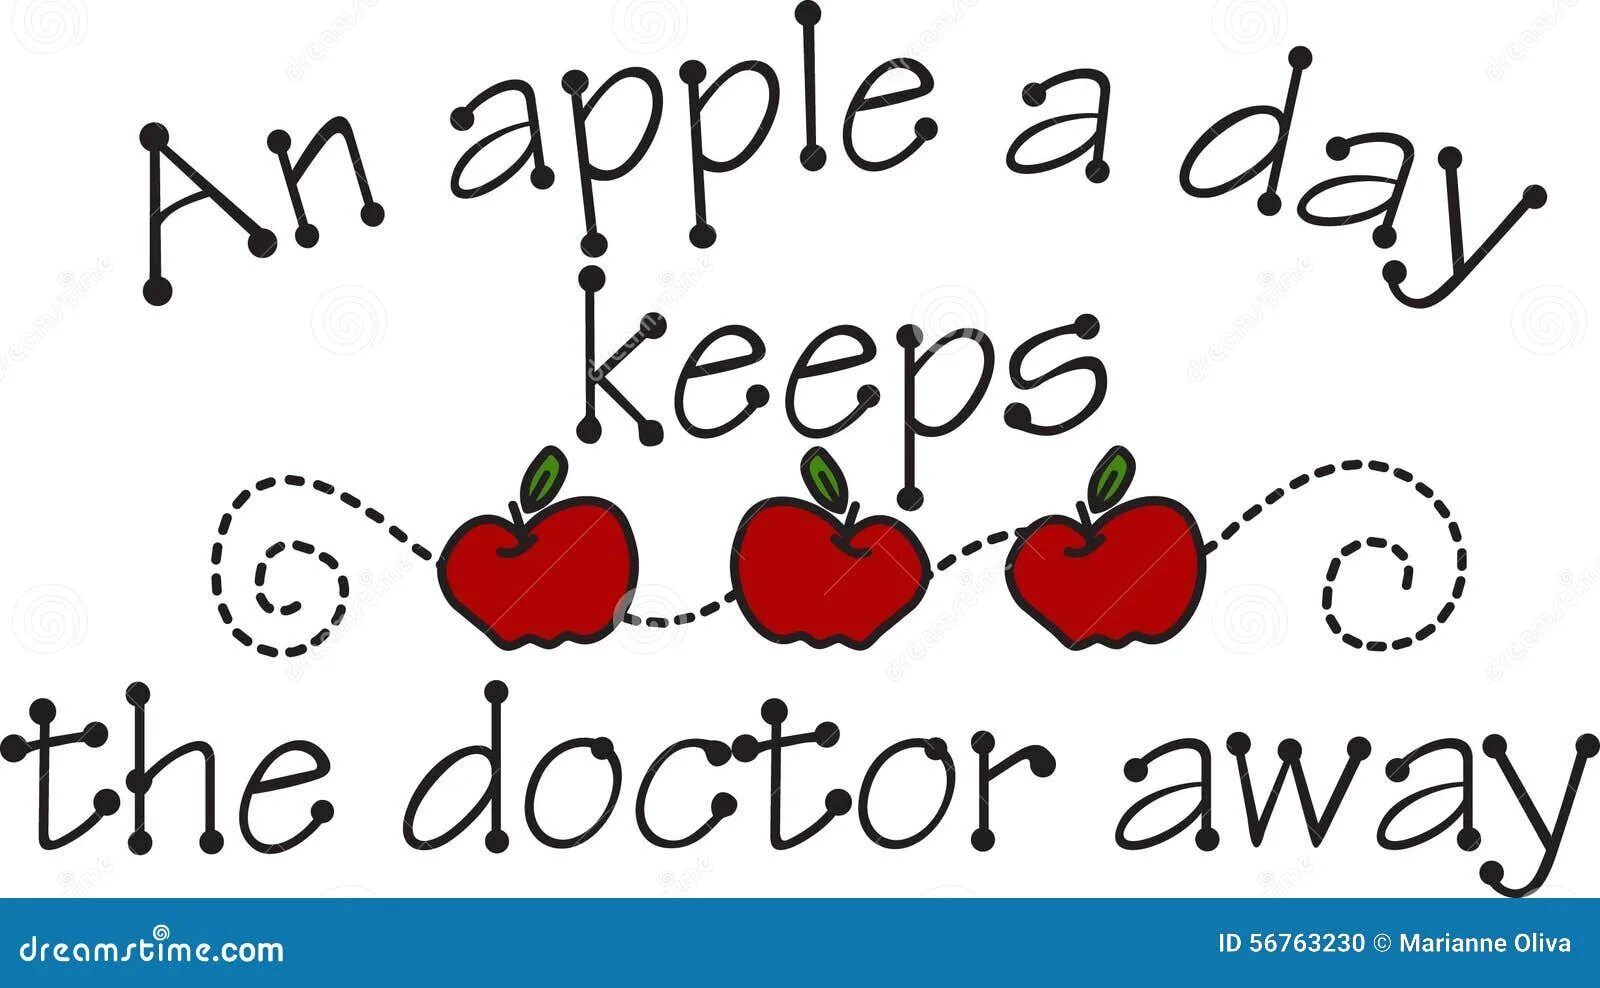 An a day keeps the doctor away. An Apple a Day keeps the Doctor away. An Apple a Day keeps the Doctor away картинки. Two Apples a Day keeps the Doctor away. An Apple a Day keeps the Doctor away идиома.